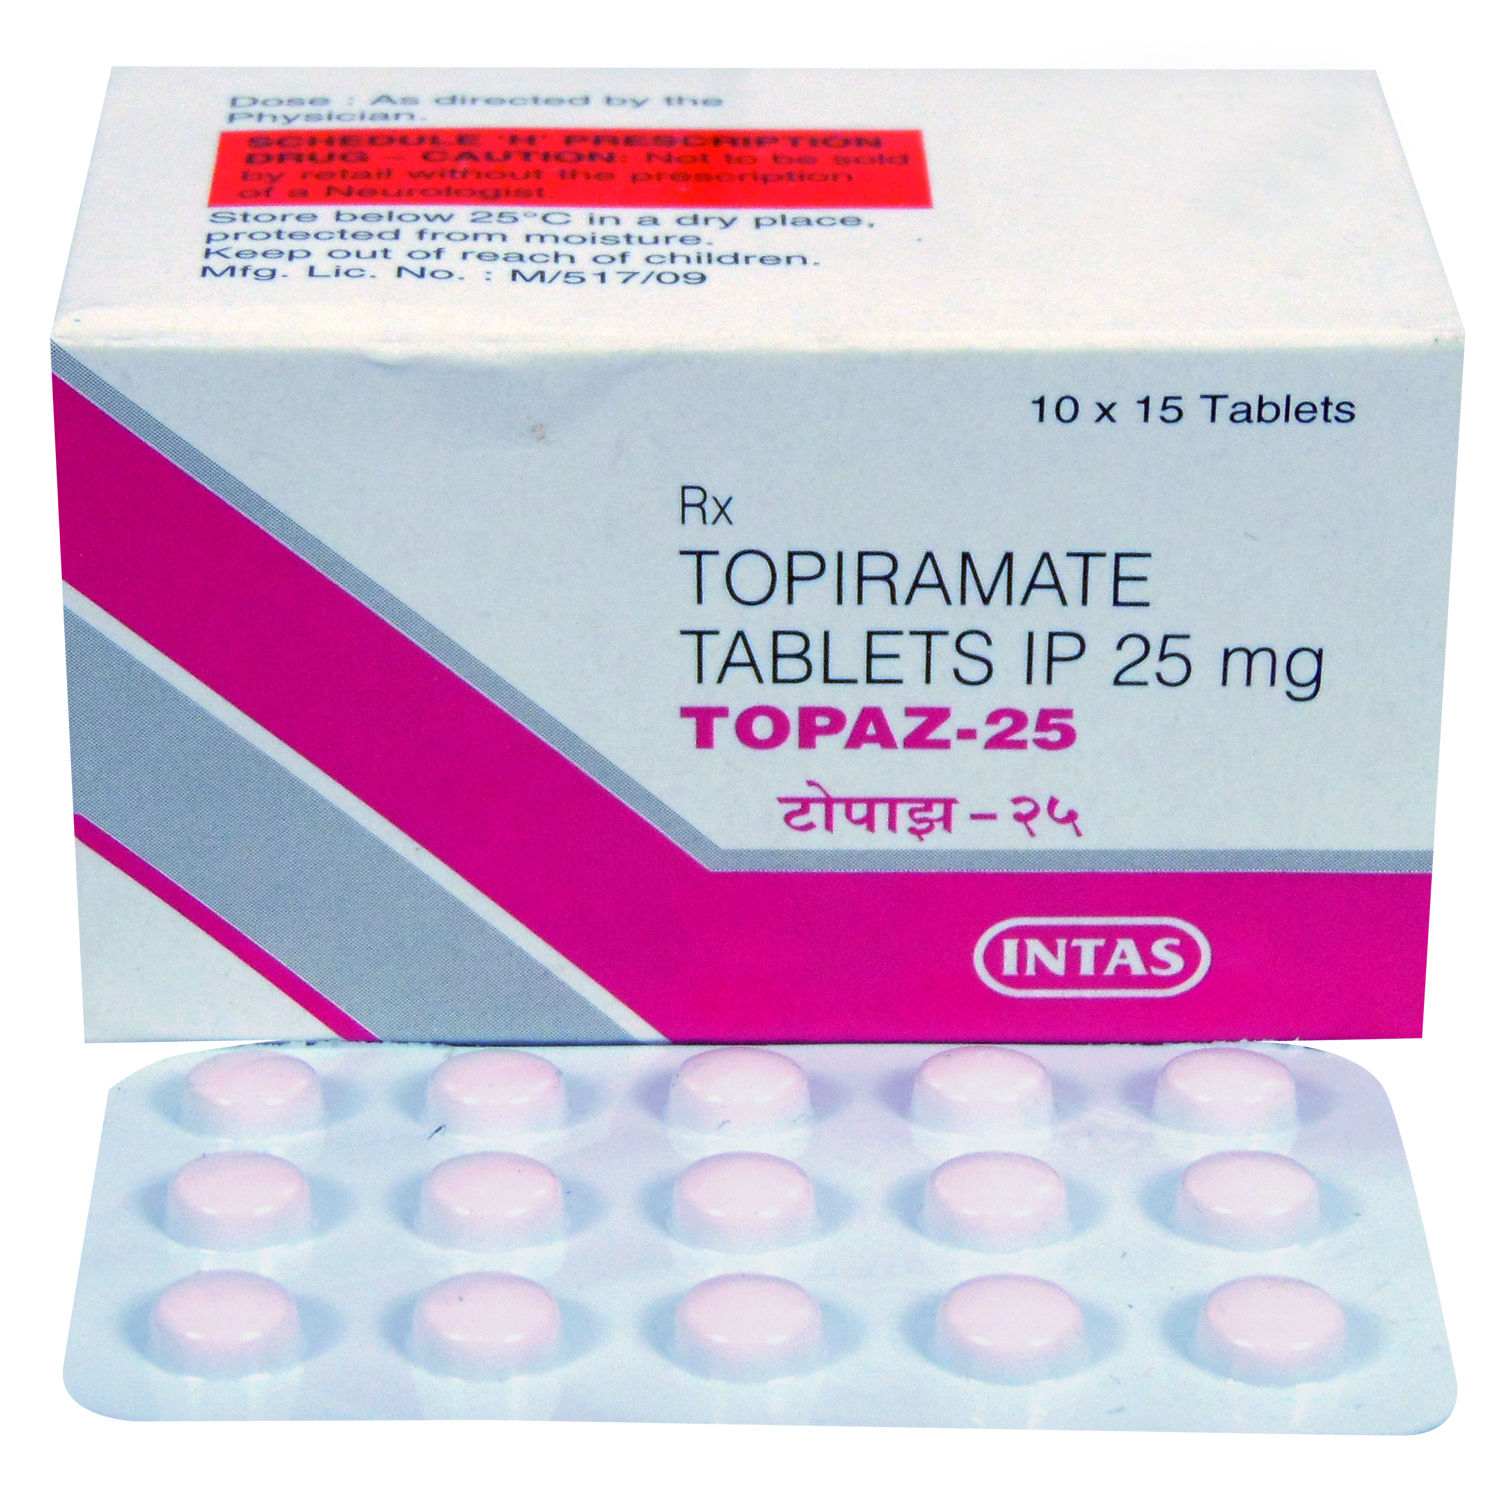 Topaz 25mg Tablet 15's Price, Uses, Side Effects - Apollo 24|7